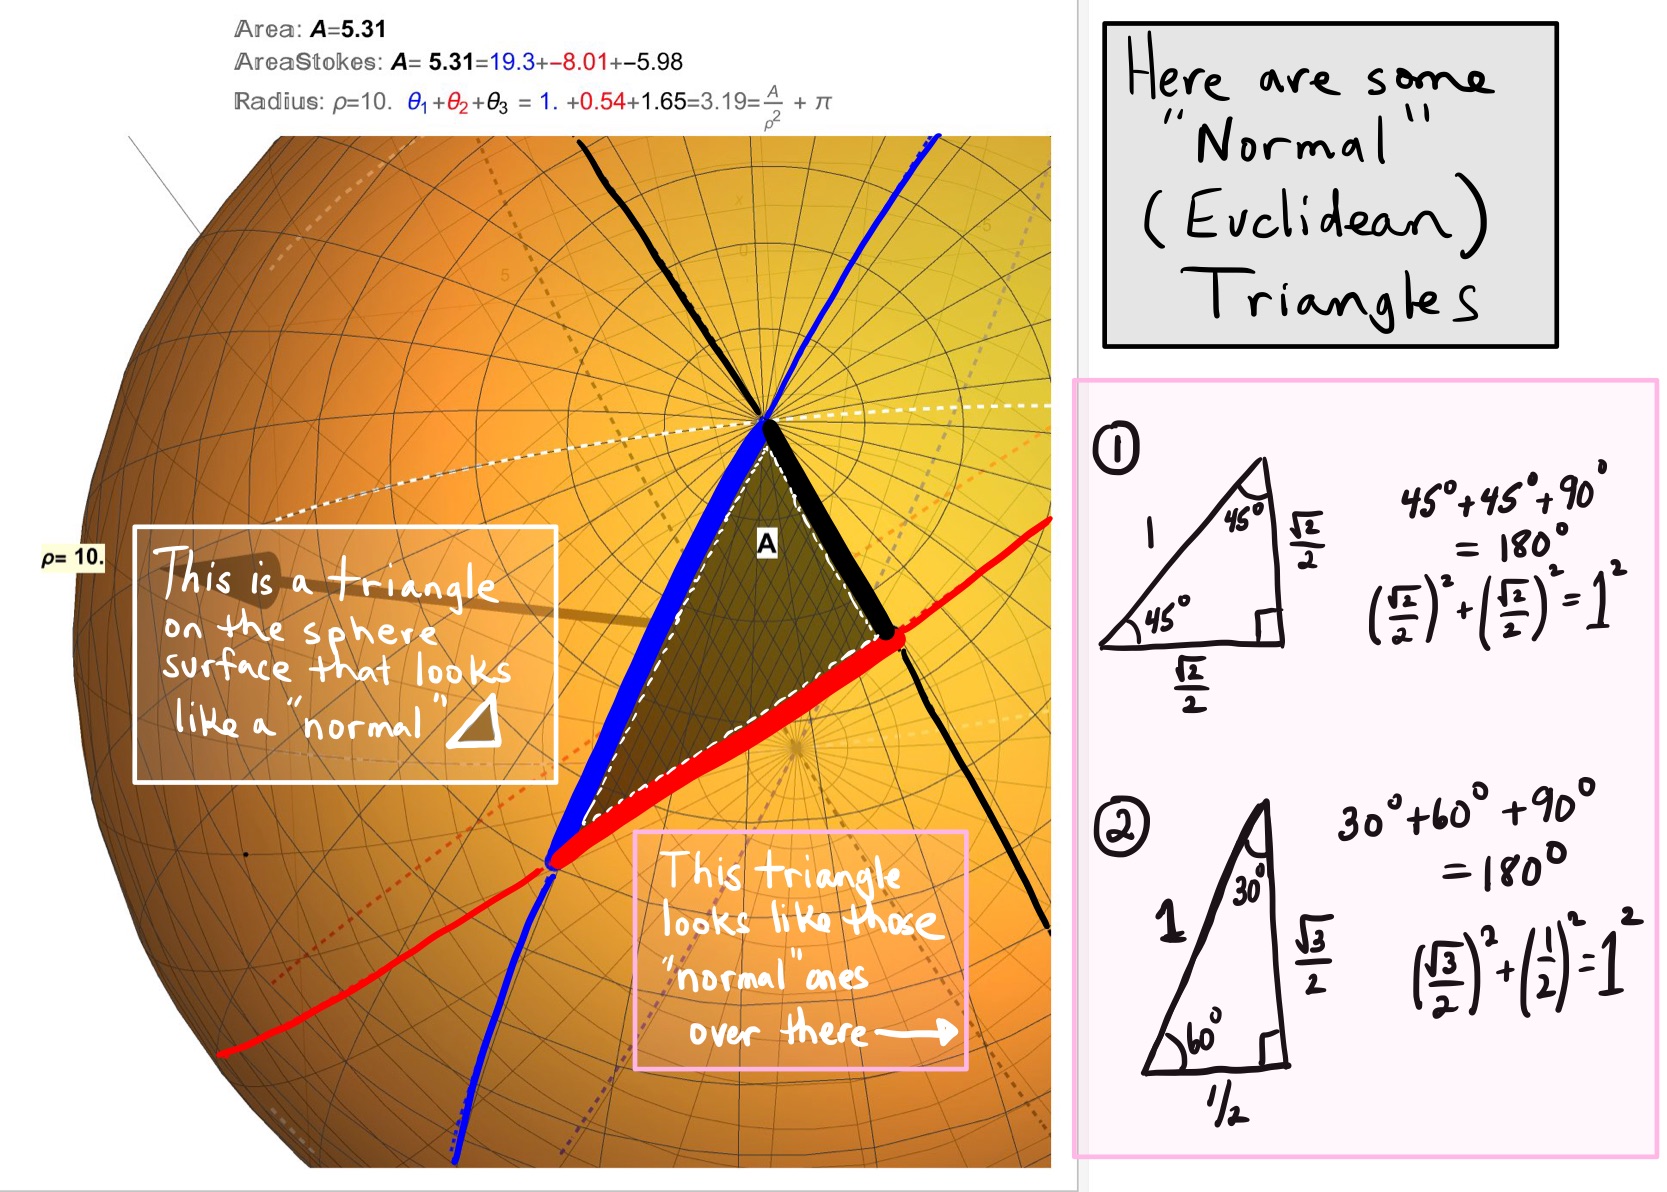 The Euclidean Limit: On a sphere of large radius, this triangle looks a lot like a “normal” (Euclidean) triangle. In a “normal” triangle, the angles add to \(\pi^{R}\) or \(180^{\circ}\) and the side lengths satisfy the Phythagorean Theorem \(a^{2}+b^{2}=c^{2}\).